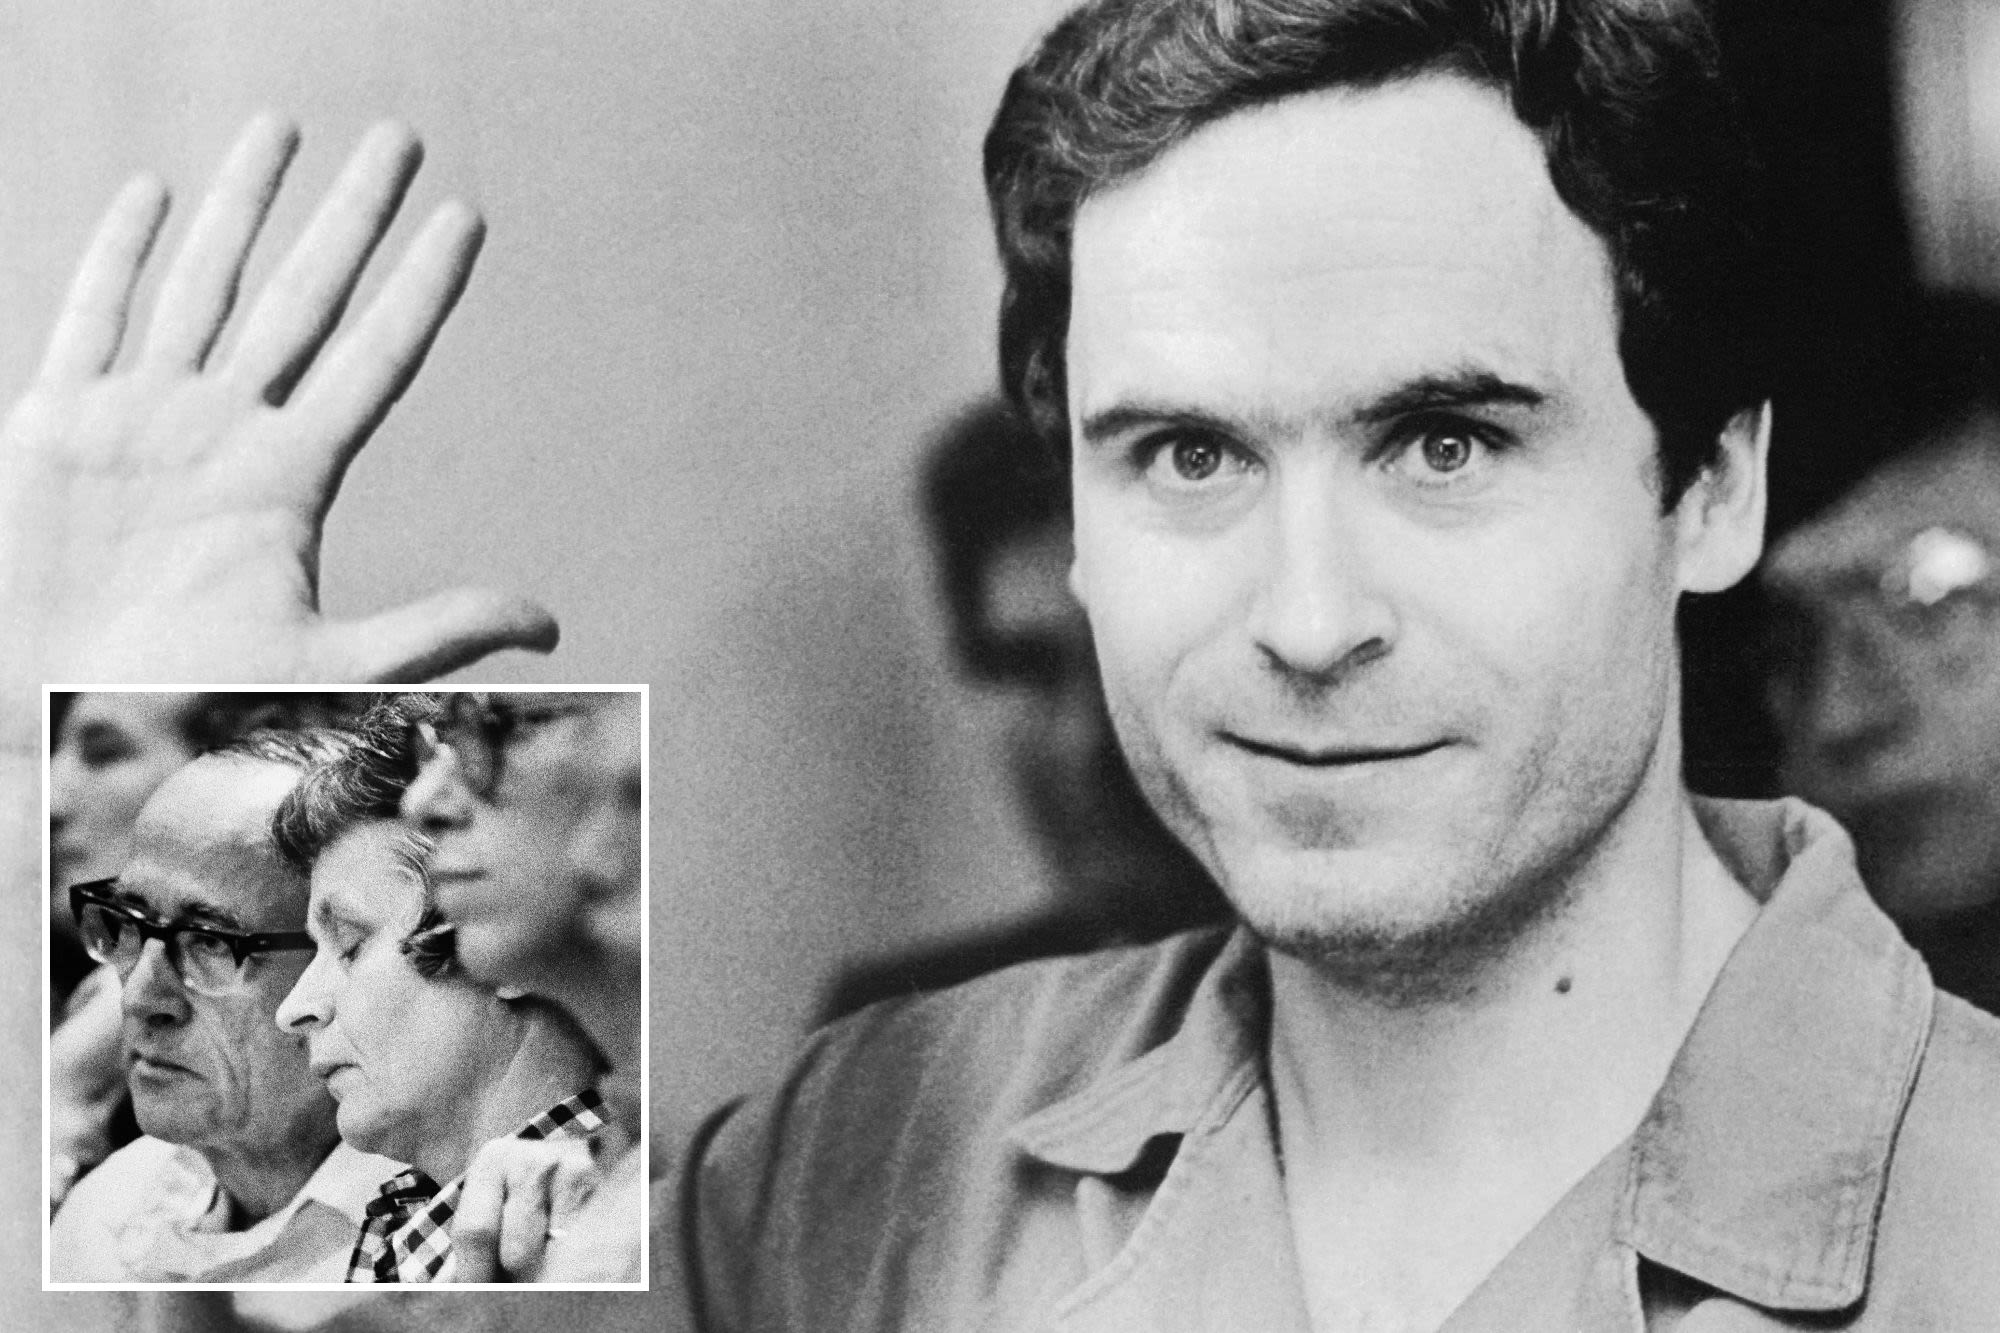 Ted Bundy’s cousin dishes on the dark family history that made a serial killer